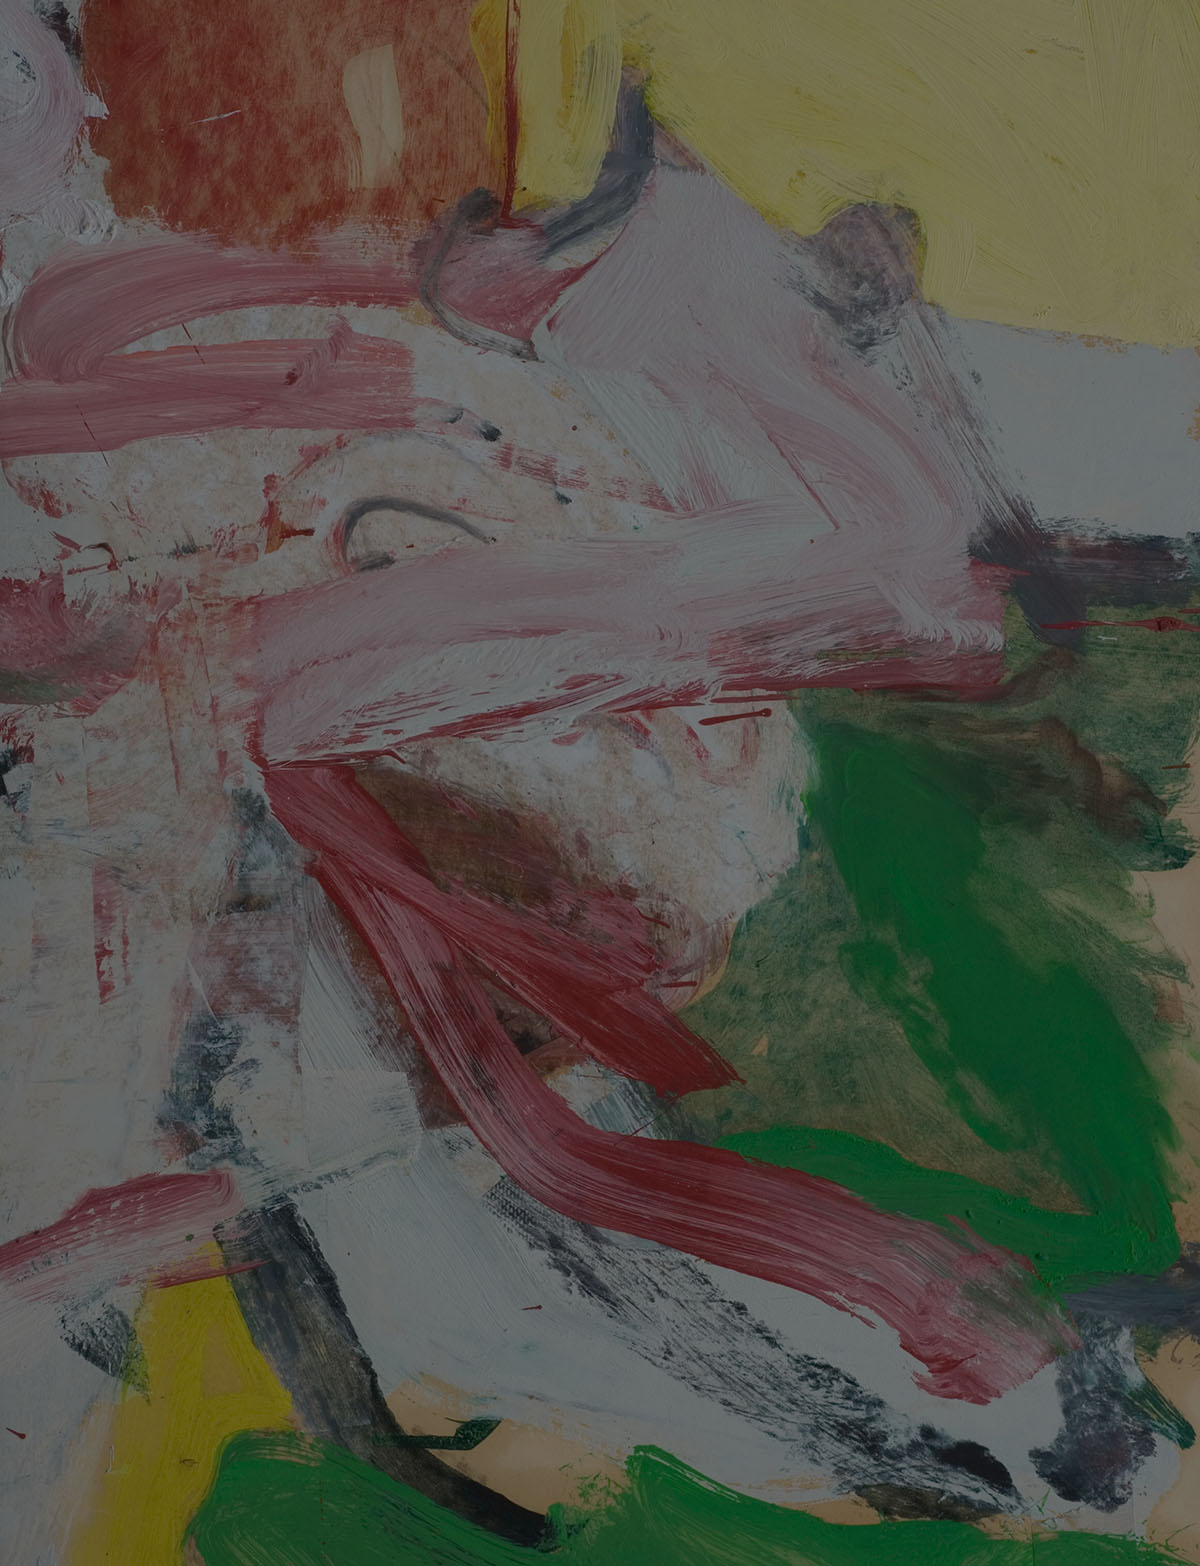 Senza titolo - Willem de Kooning - 1970oil on paper glued on canvas, cm 91,5 x 61,5
Friam Collection